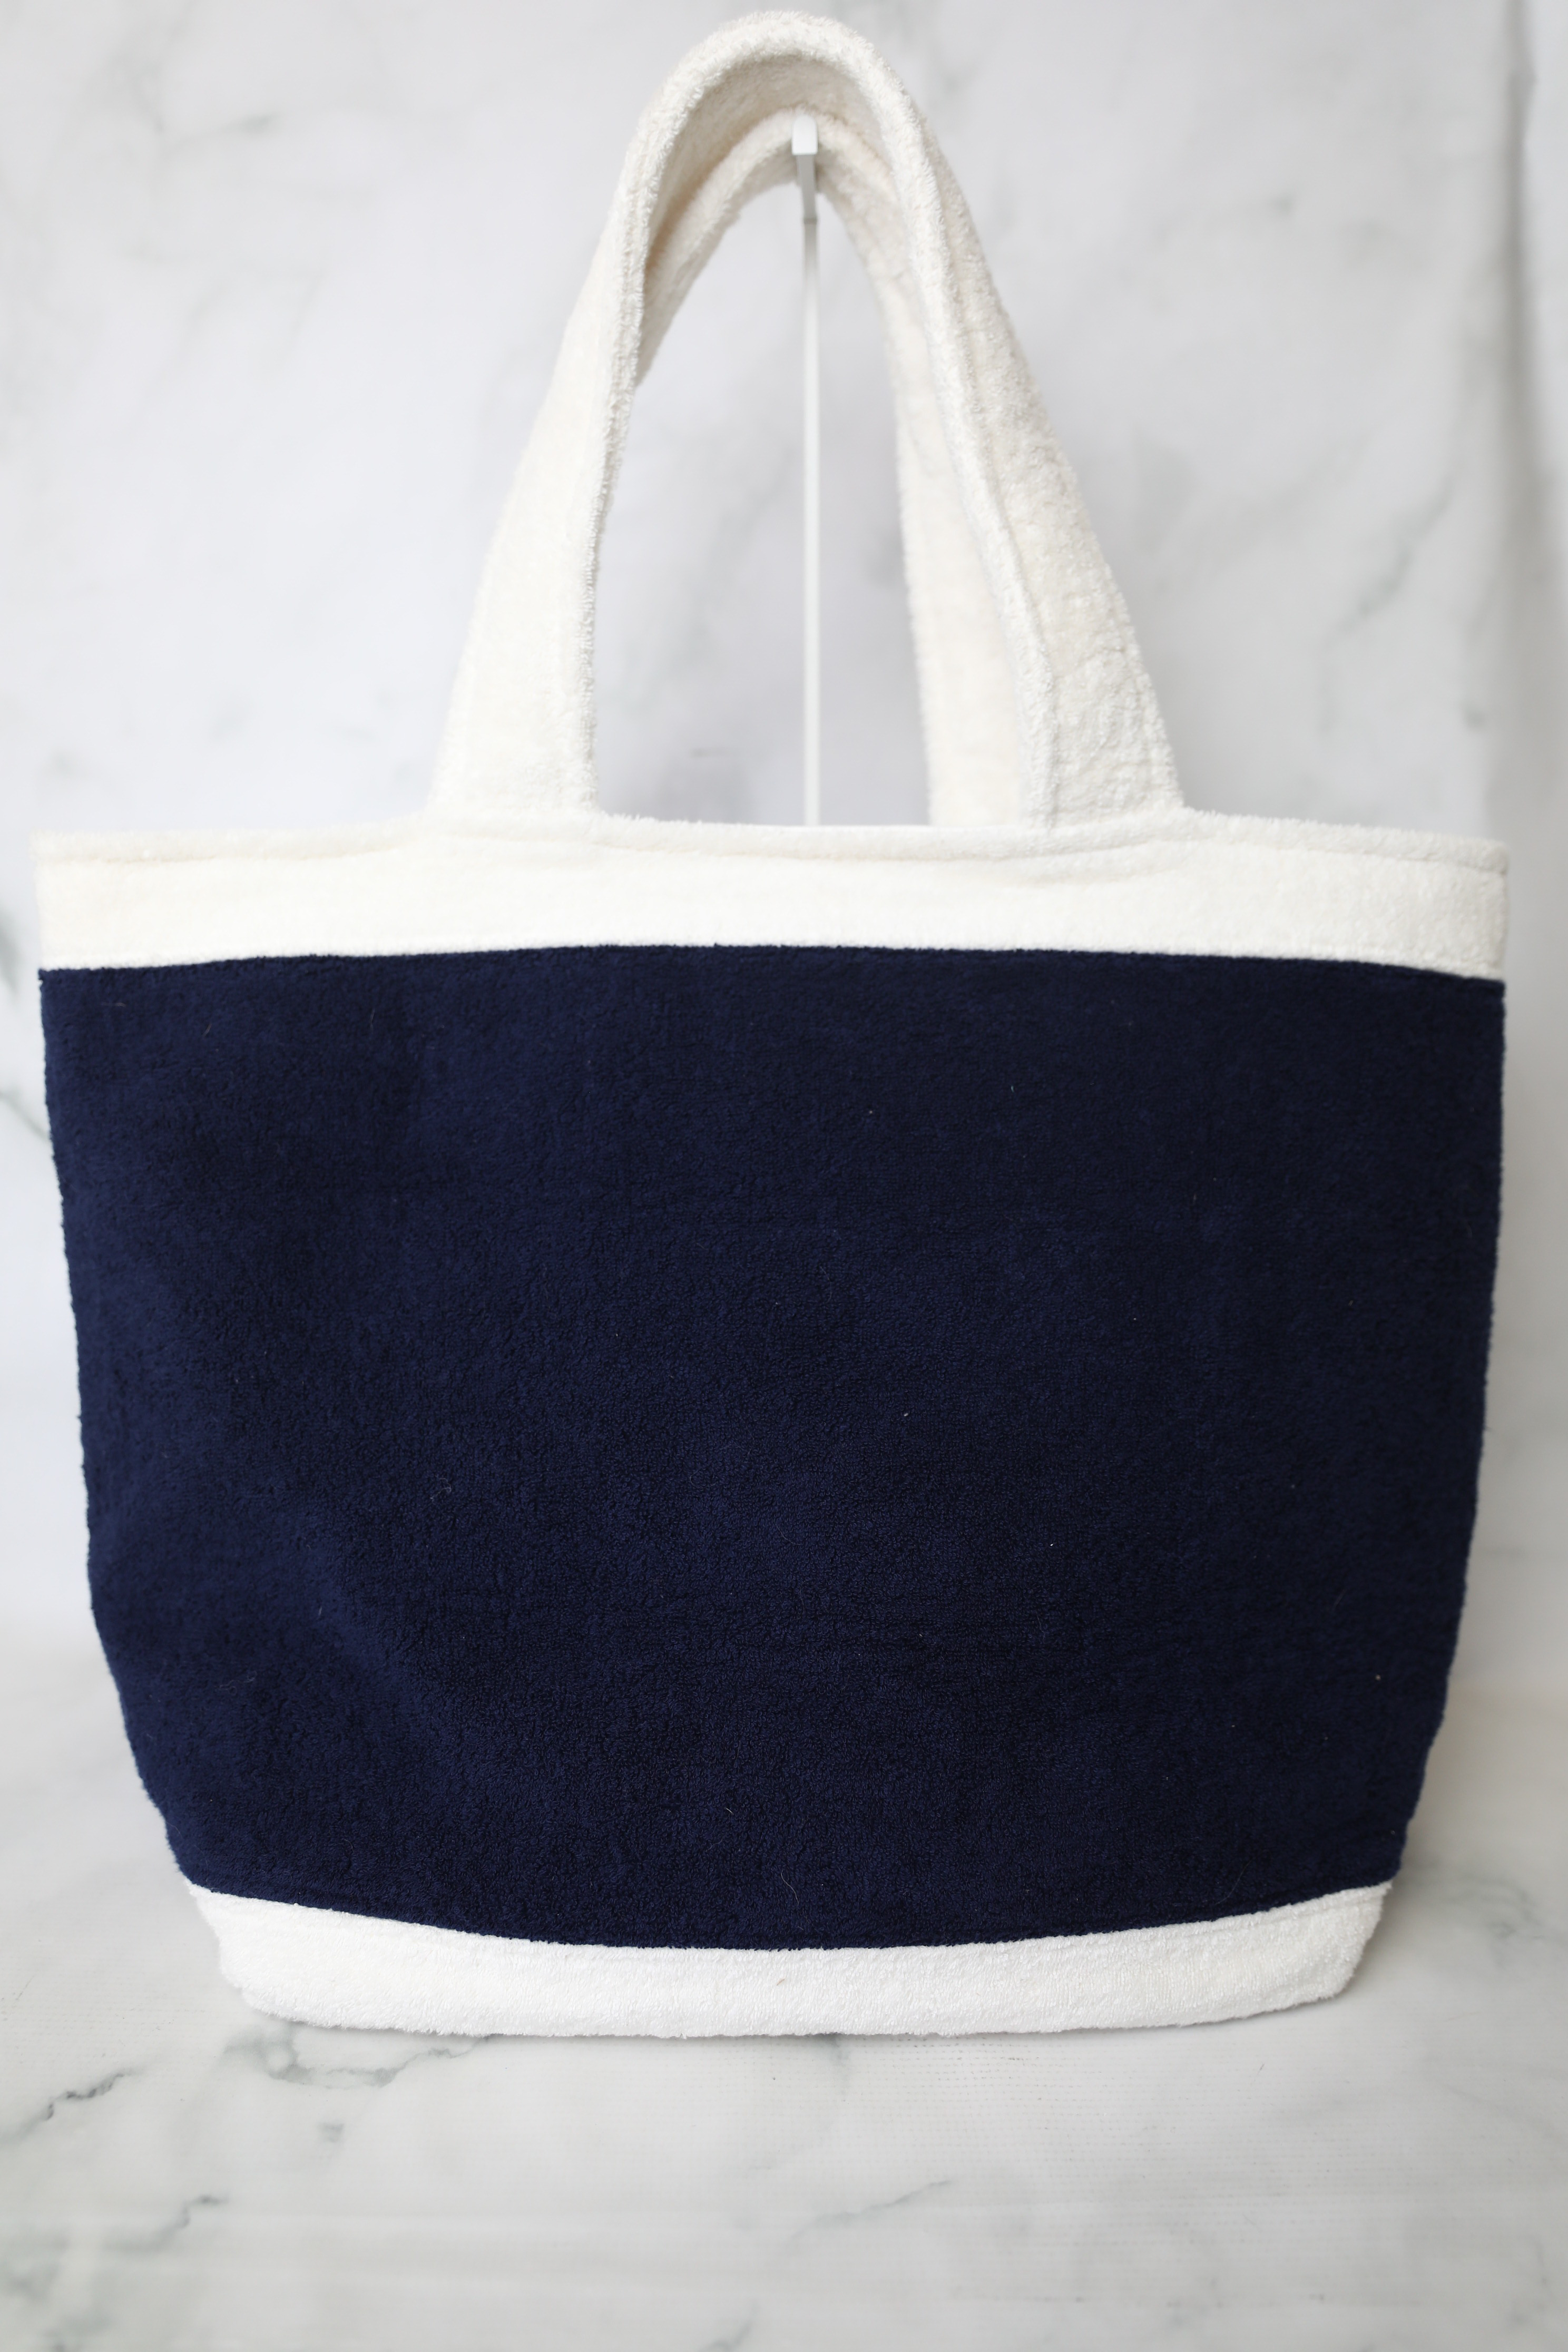 Chanel Terry Beach Tote With Towel, White and Navy Terry Fabric, New In  Dustbag WA001